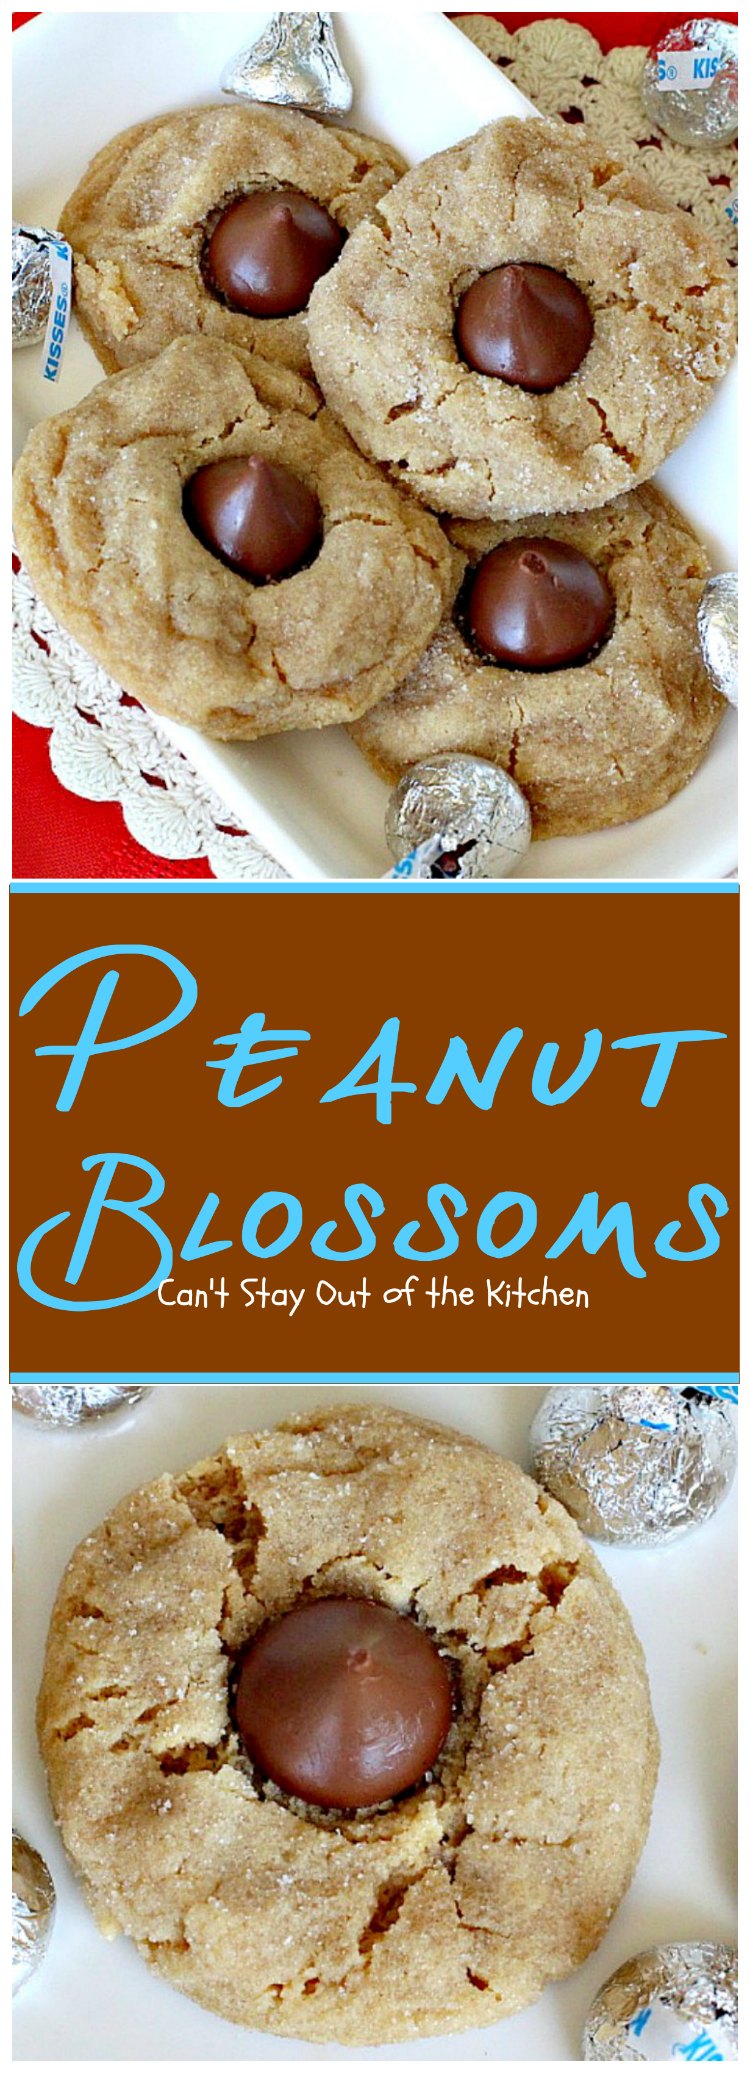 Peanut Blossoms | Can't Stay Out of the Kitchen